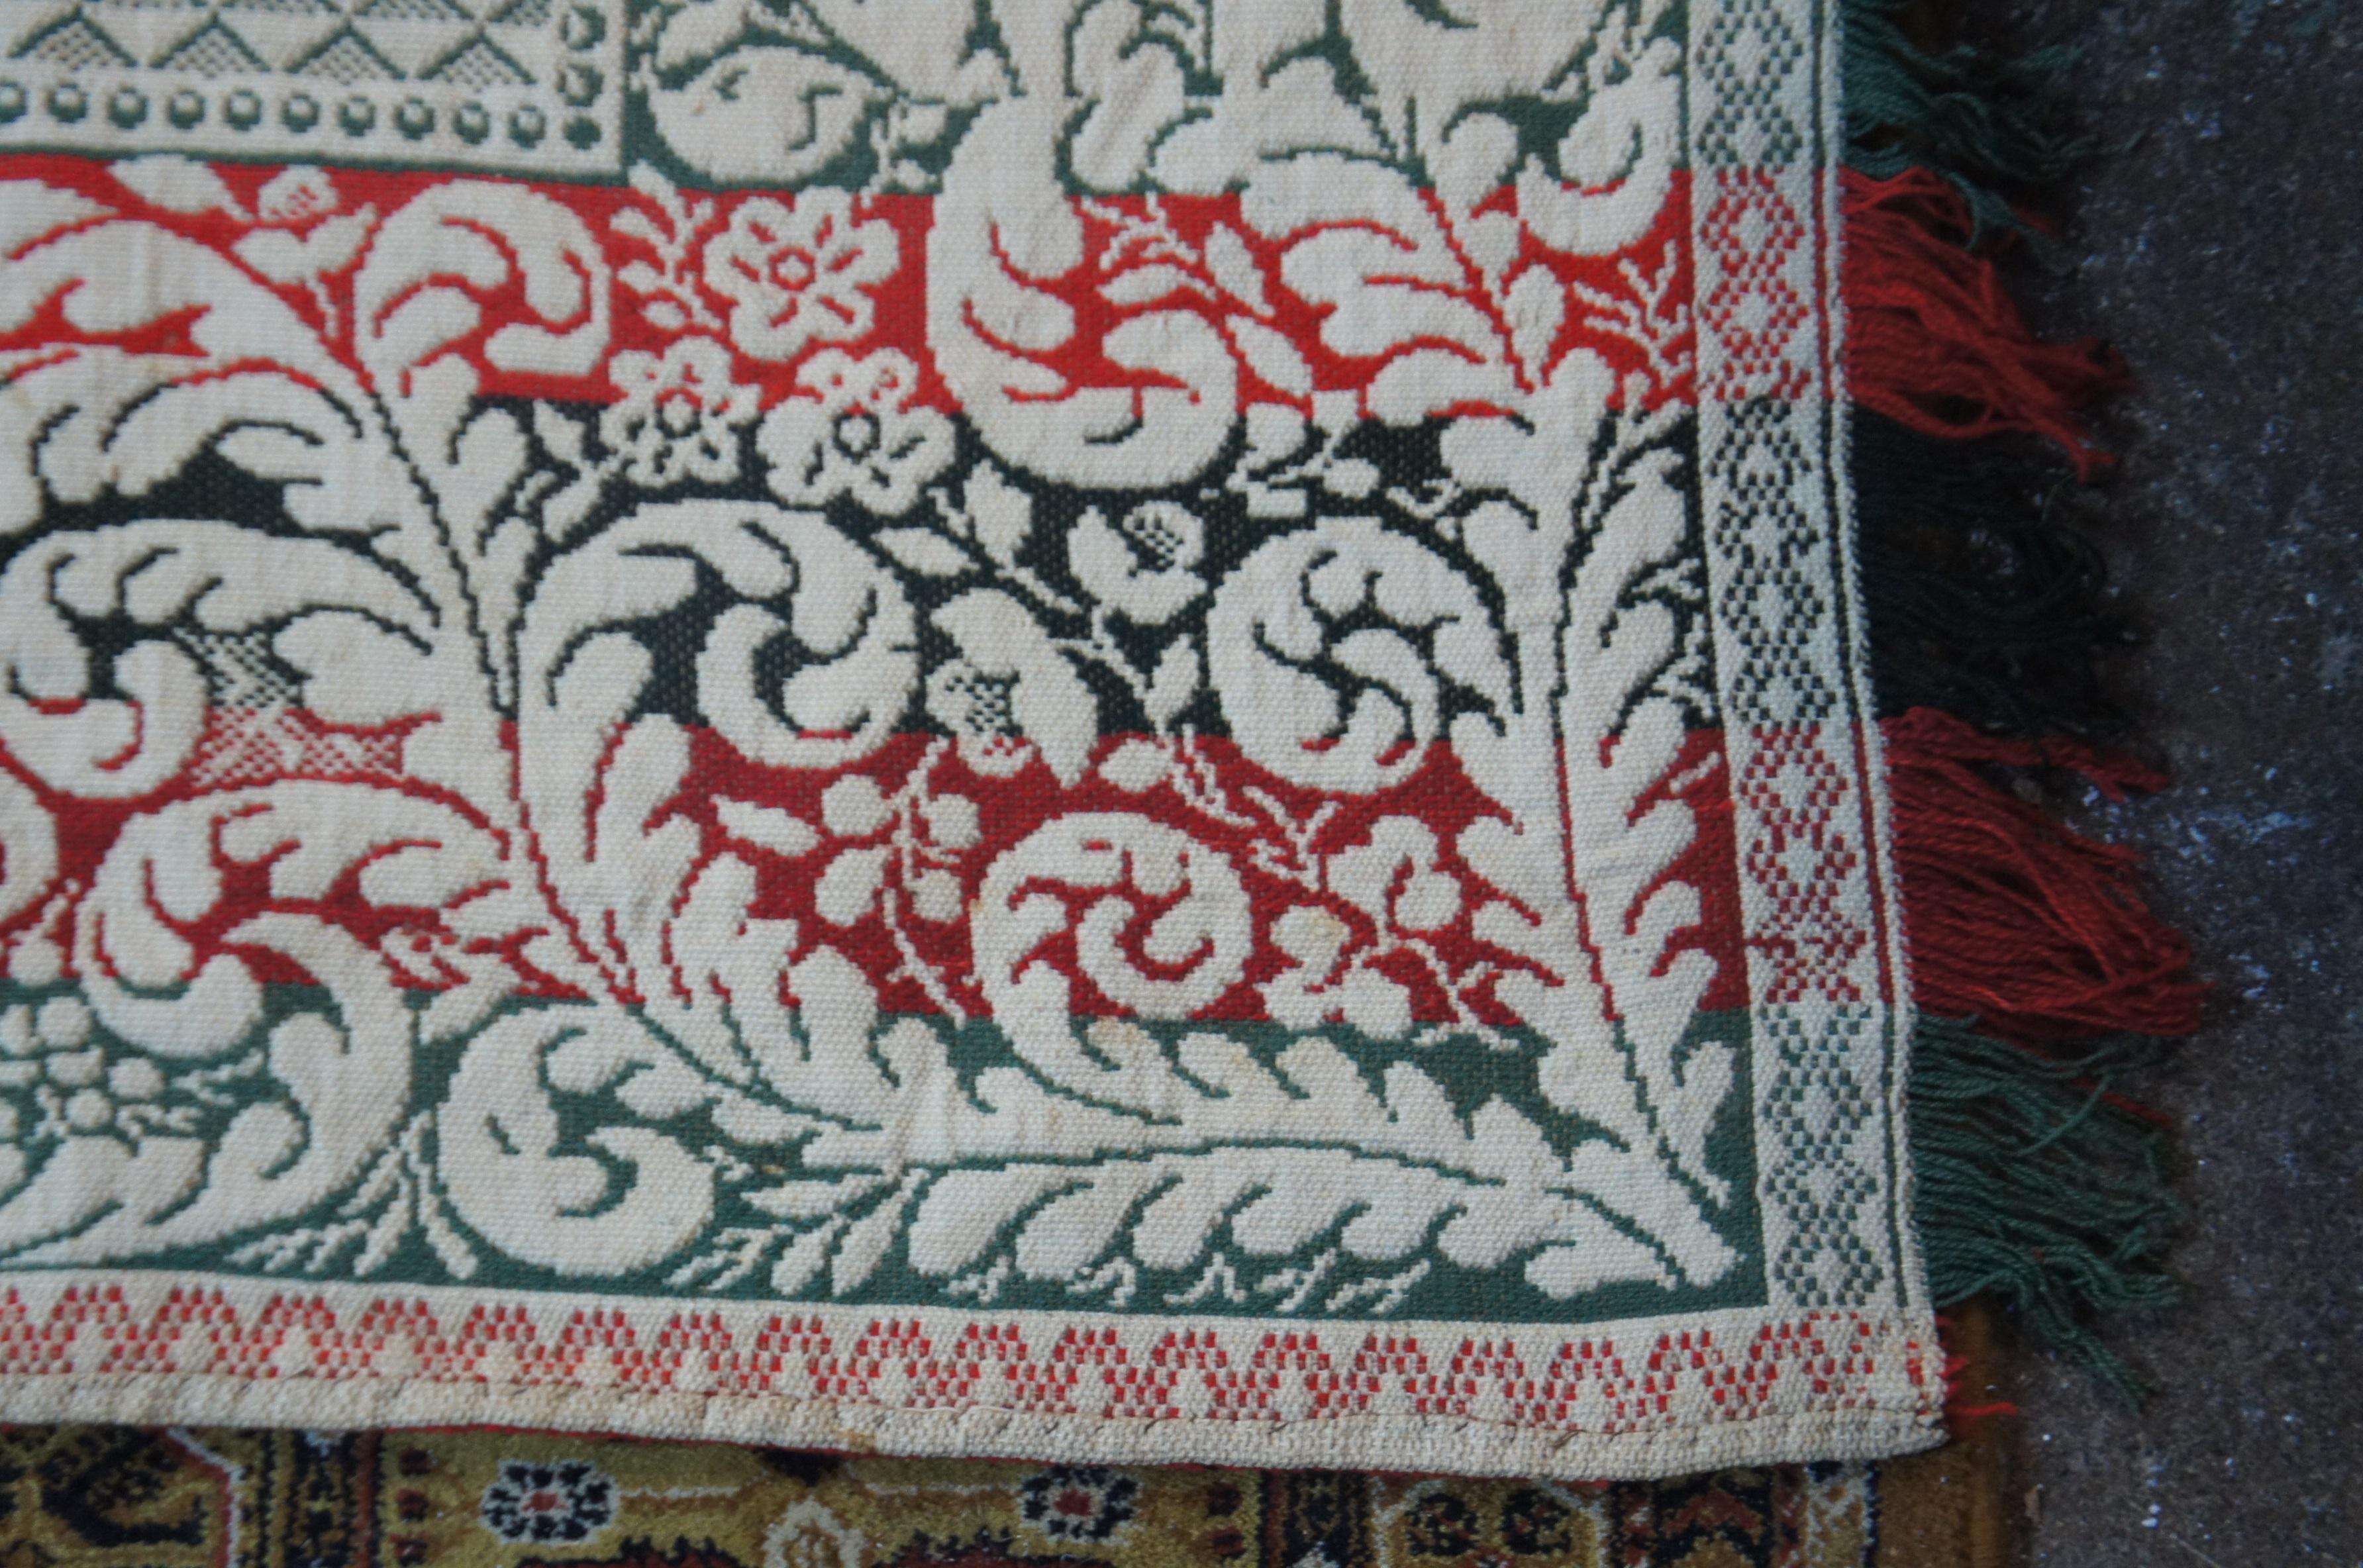 Vintage Hand Woven Full Queen Green & Red Geometric Blanket Bedspread Throw 87 In Good Condition For Sale In Dayton, OH